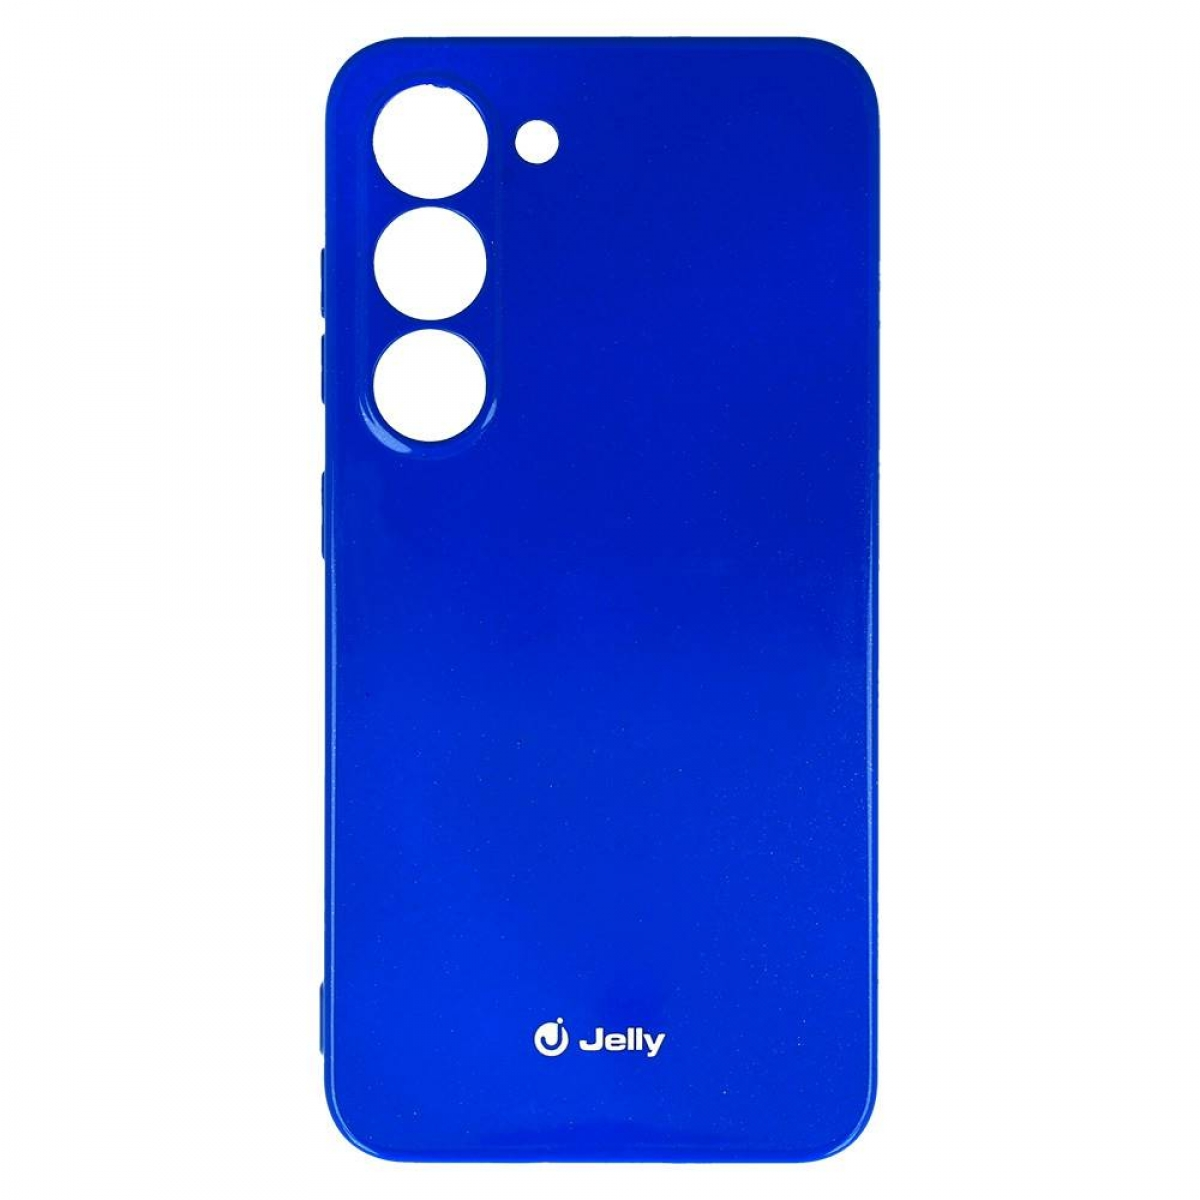 Plus, S23 Galaxy Backcover, Jelly, CASEONLINE Navy Samsung,